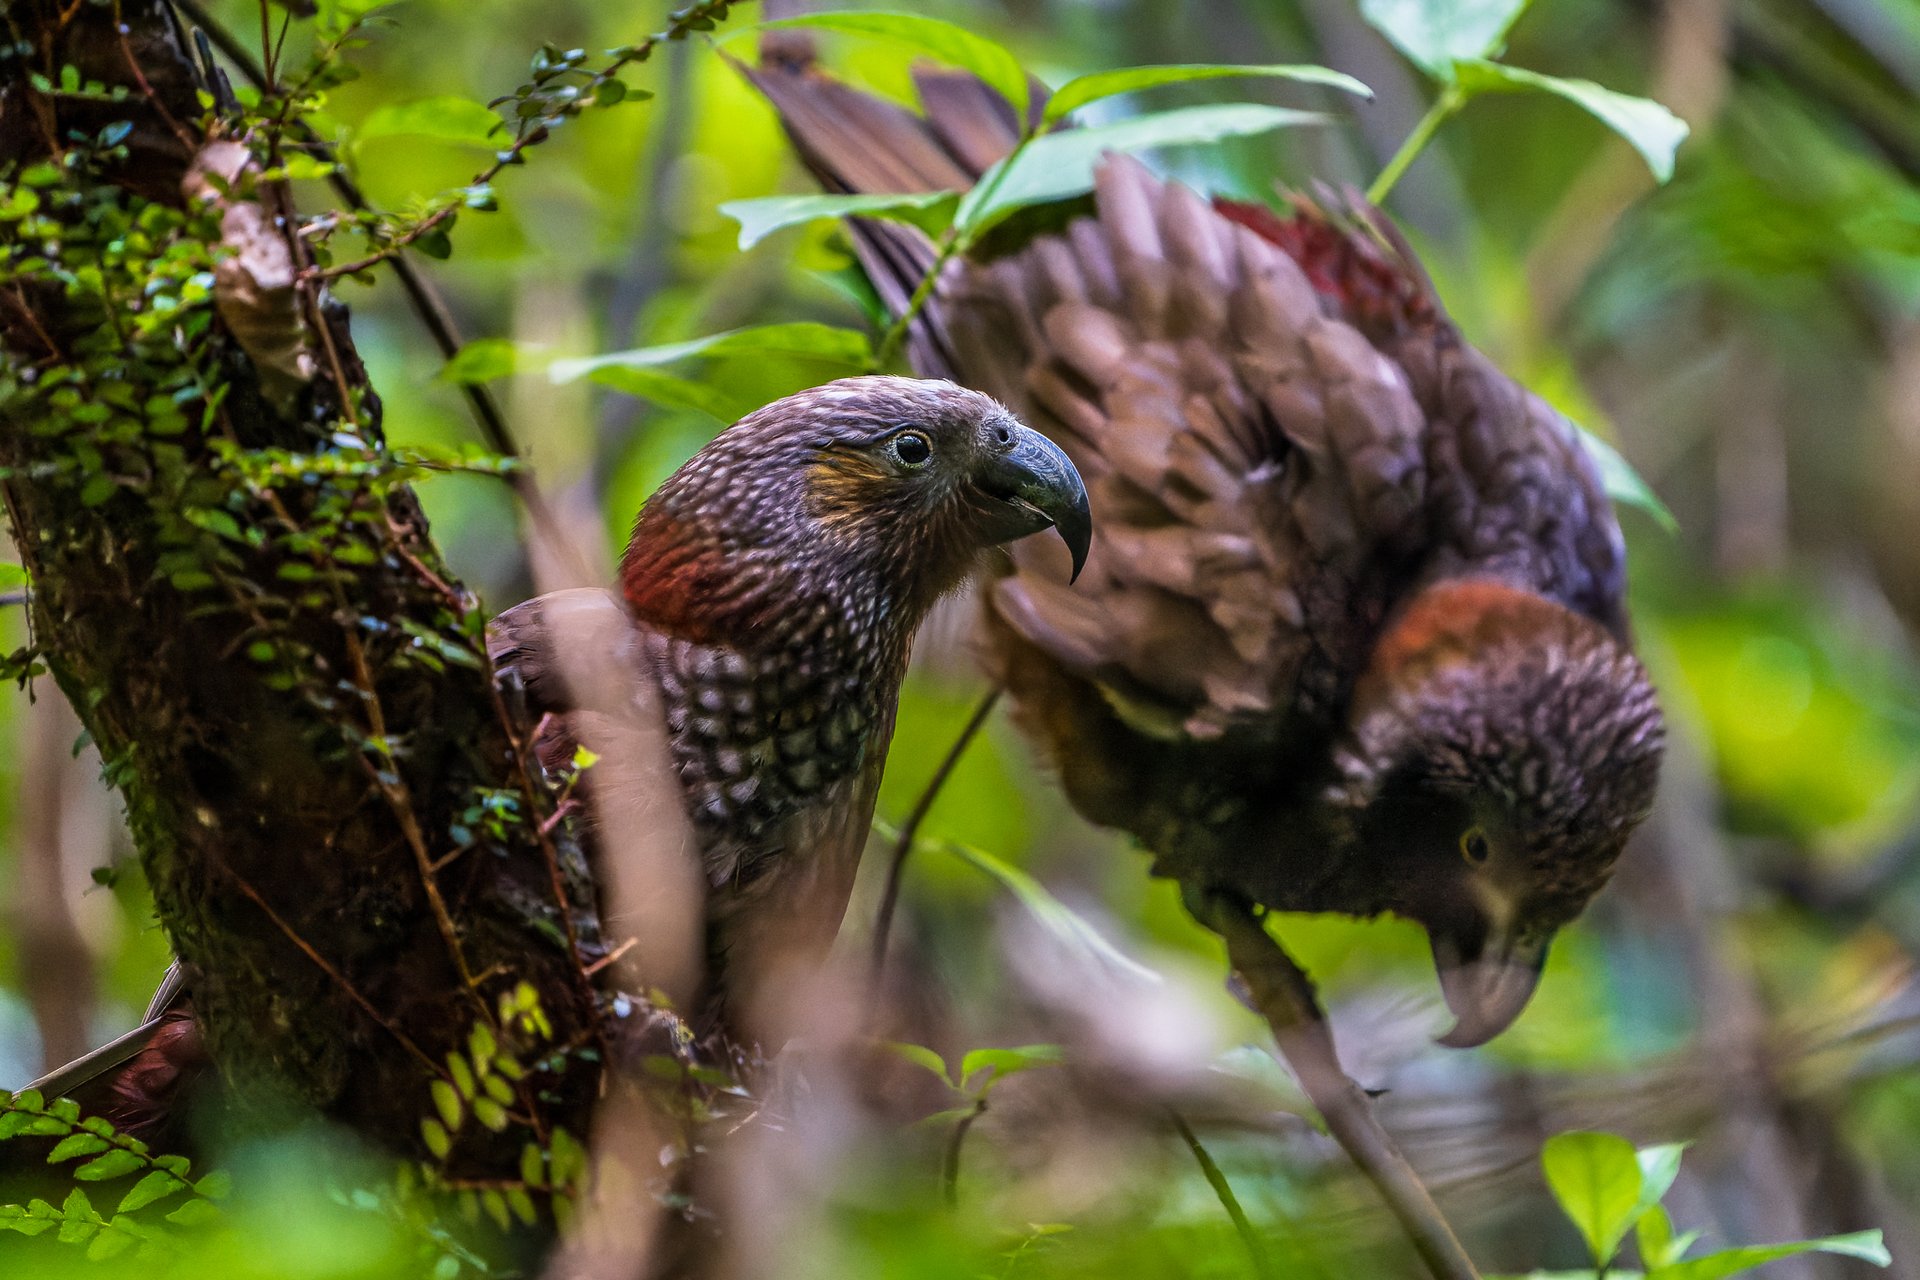 10-Day Northern Trail Tour from Wellington to Auckland: An Unmissable Māori Cultural Experience and Hāngi | Rare Bird Species at Zealandia | Hobbiton Movie Set | 